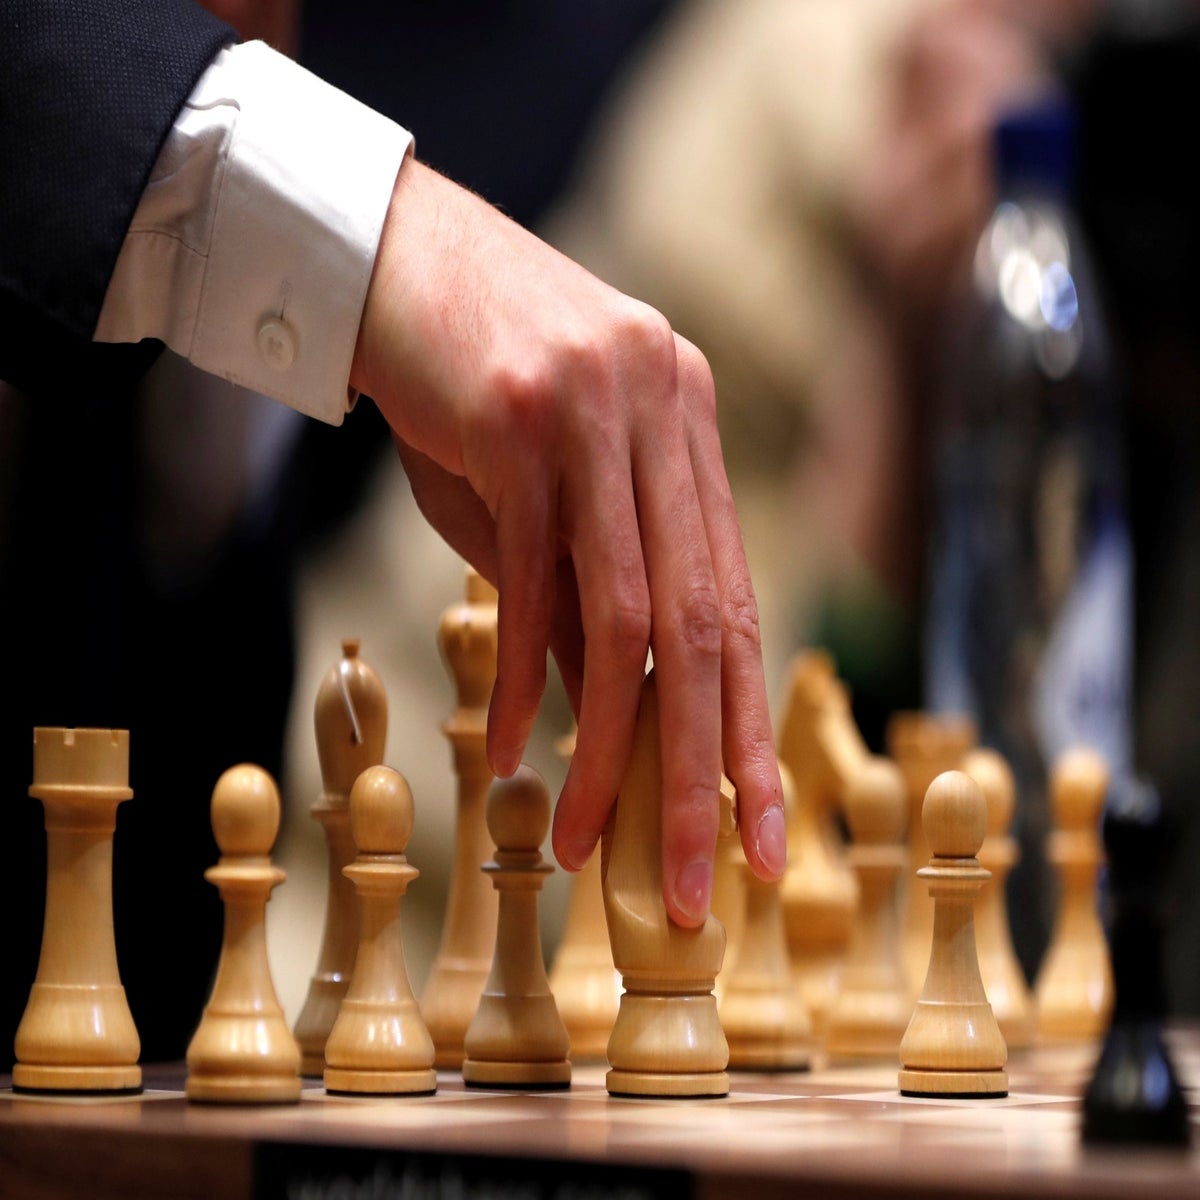 Indian Chess Players' Unsuccessful Performance at the FIDE Grand